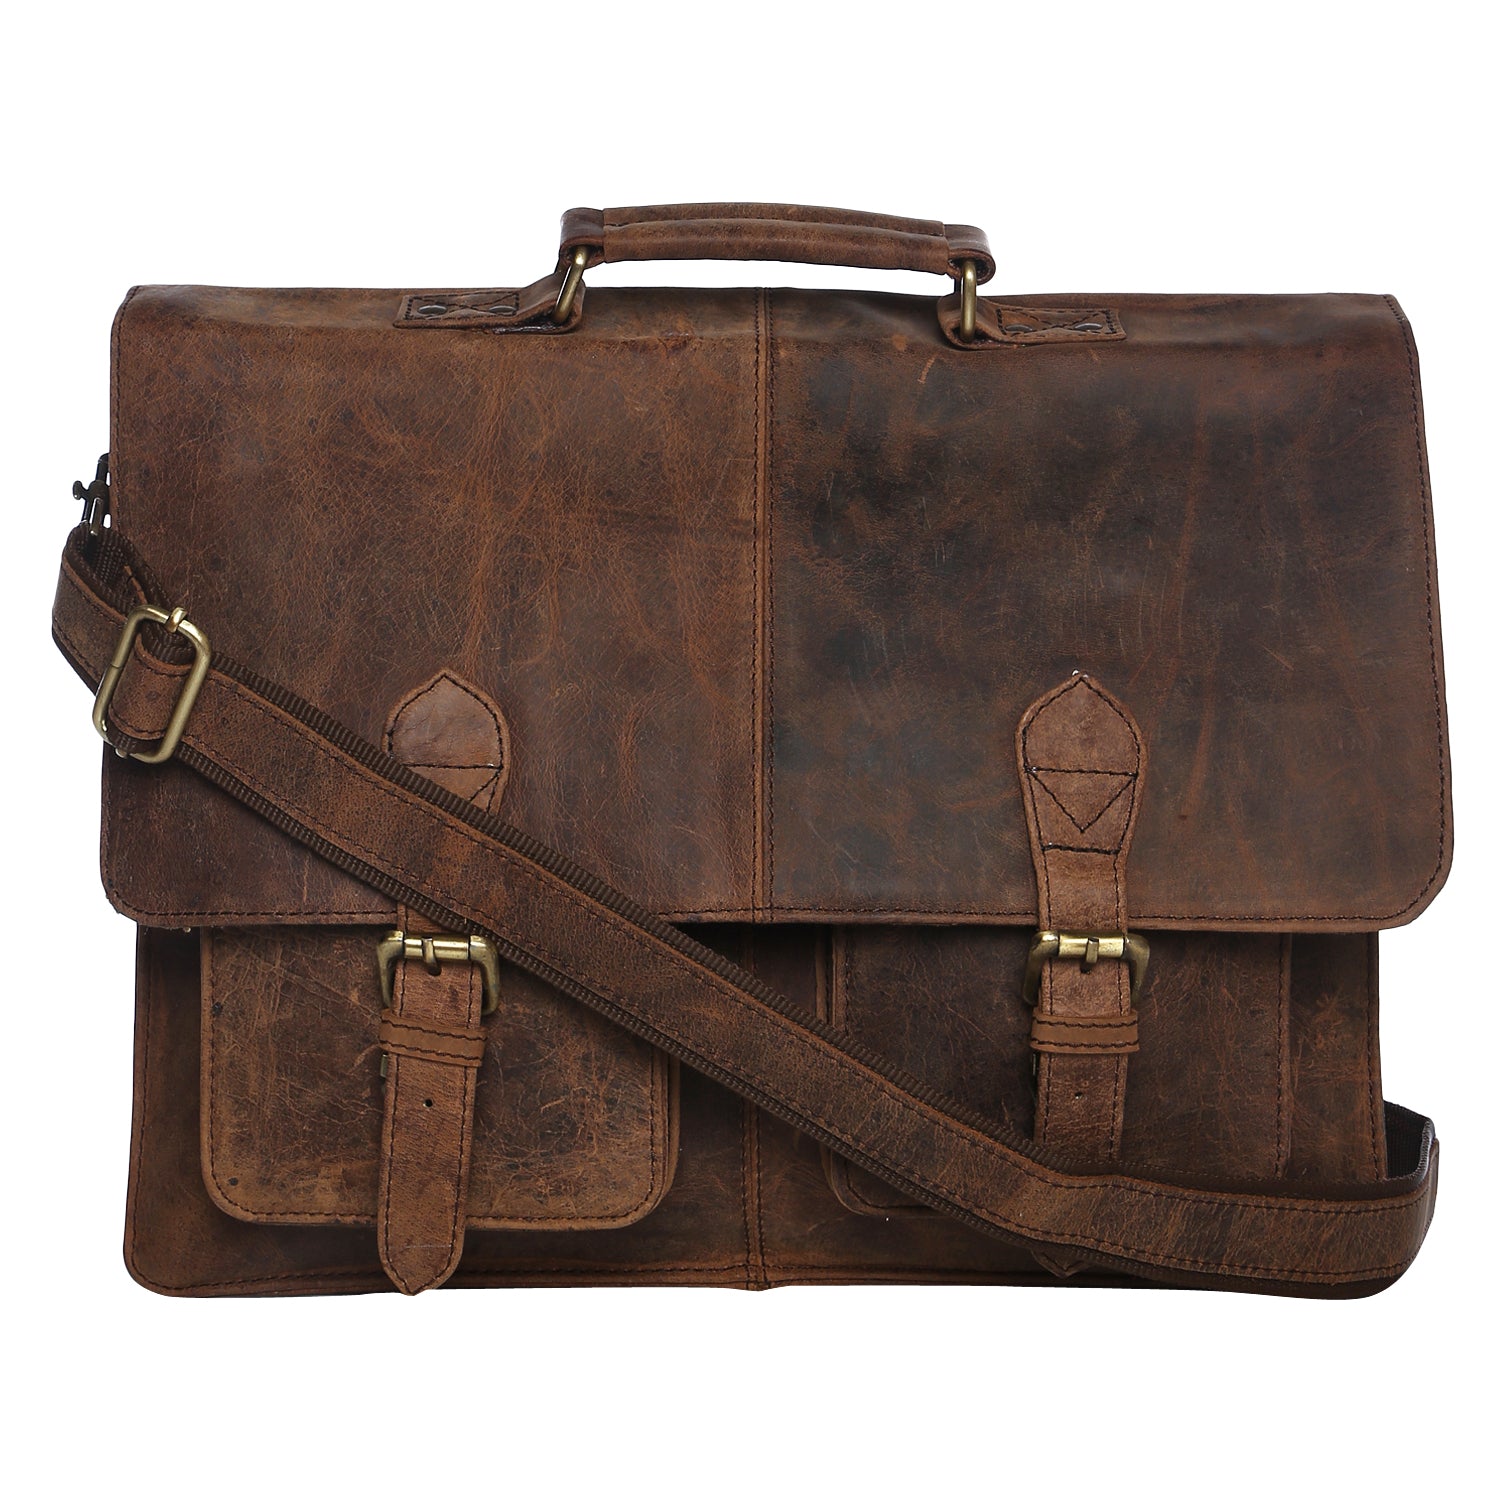 Buy Leather Briefcase Online | High On Leather